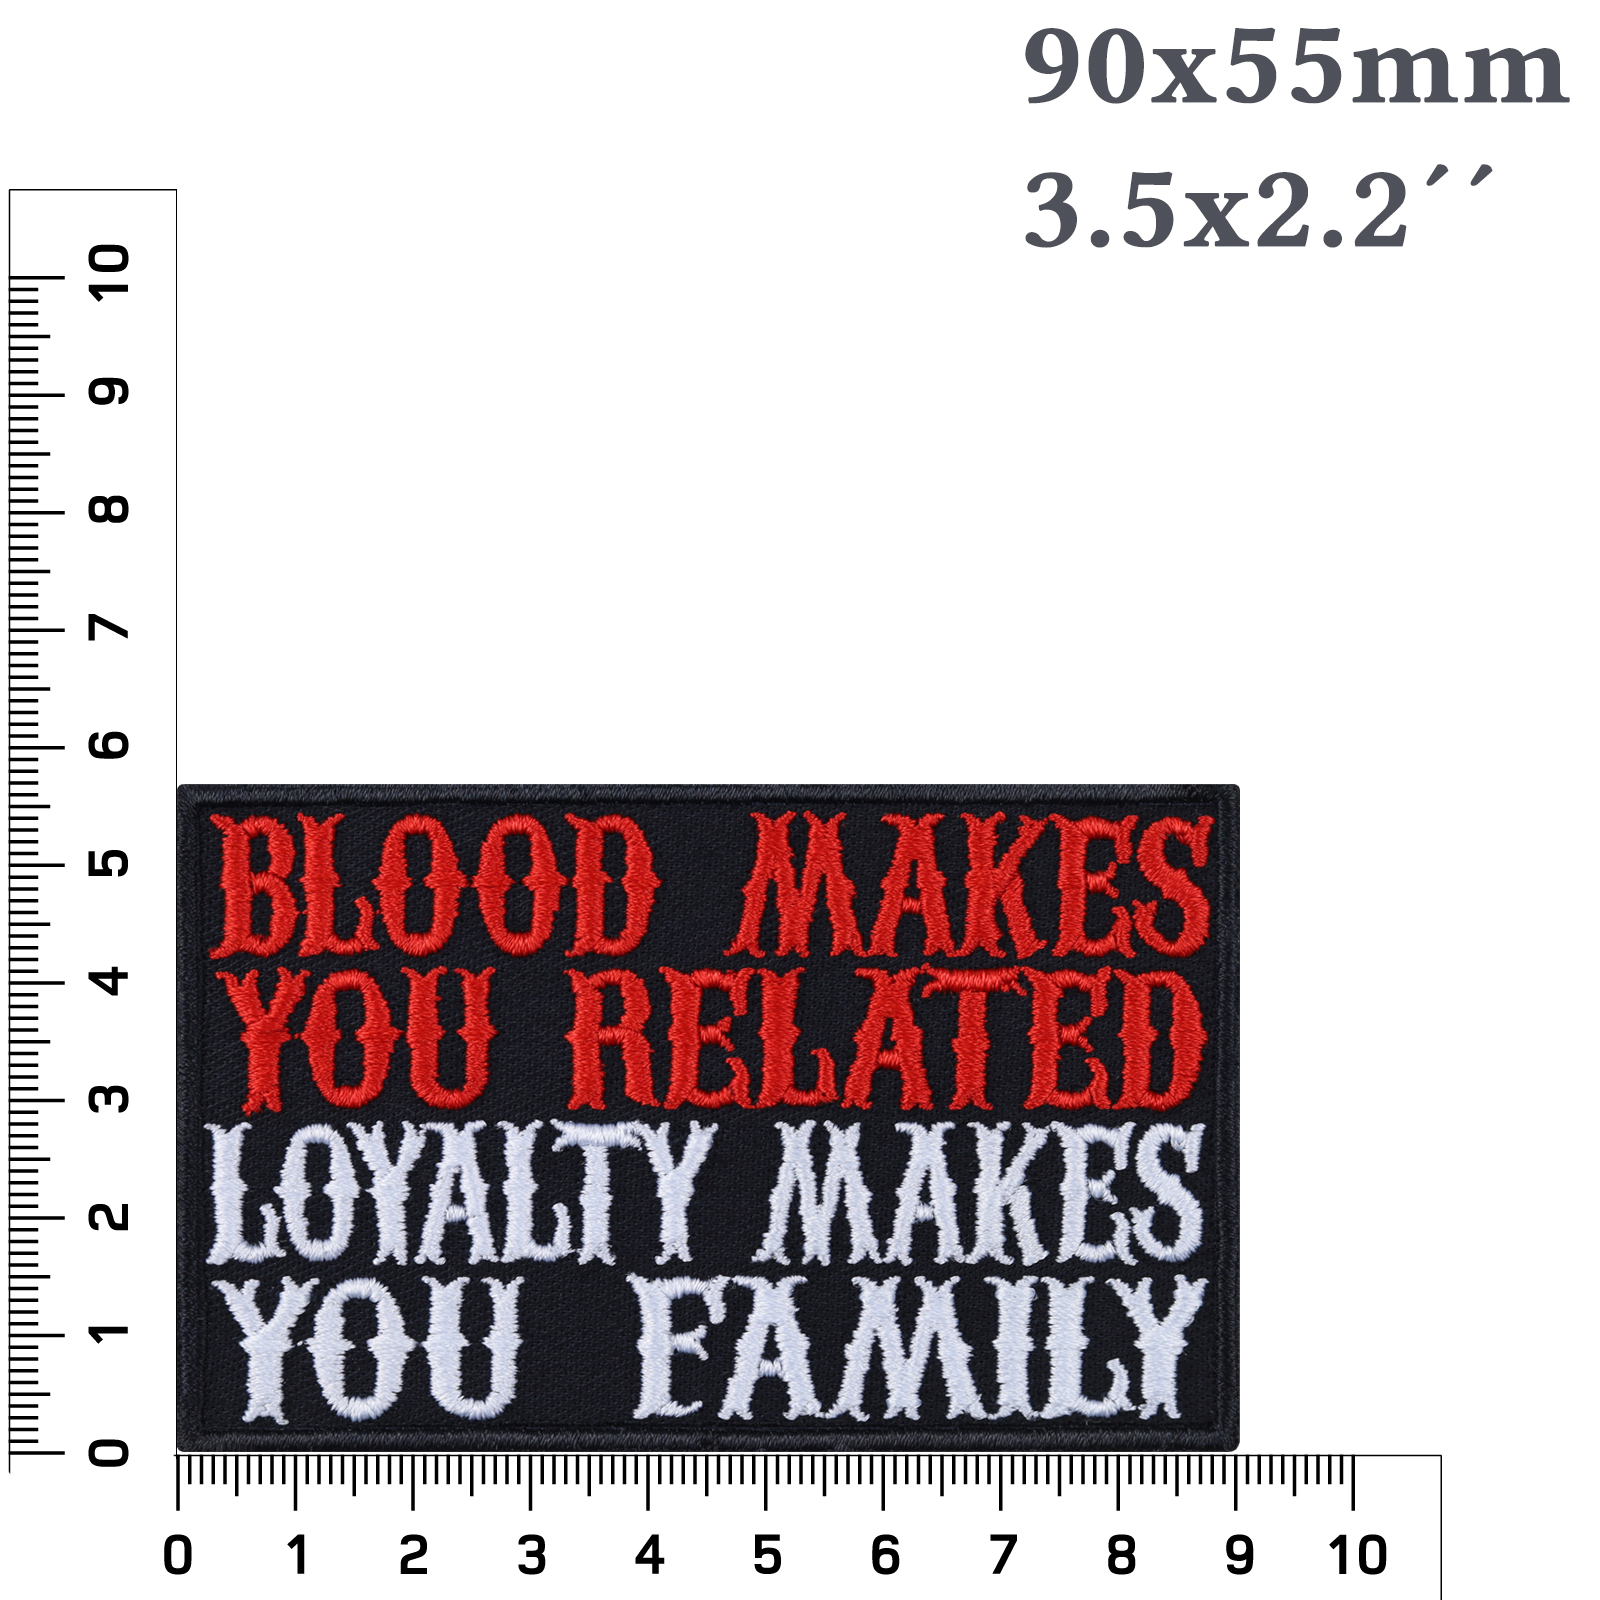 Blood makes you related - loyalty makes you family - Patch